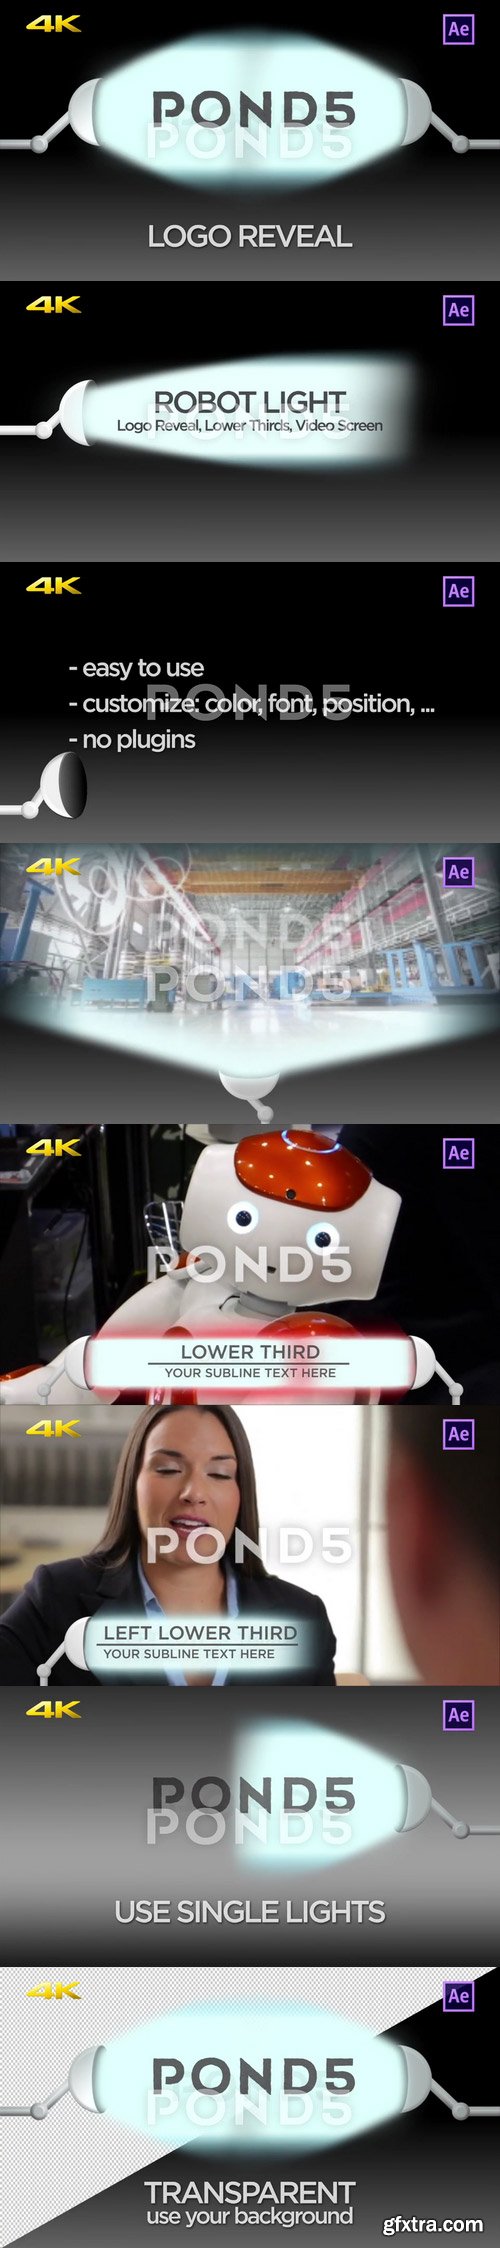 Pond5 - Robot Light Logo Reveal - Lower Thirds - Video Projection 72408387